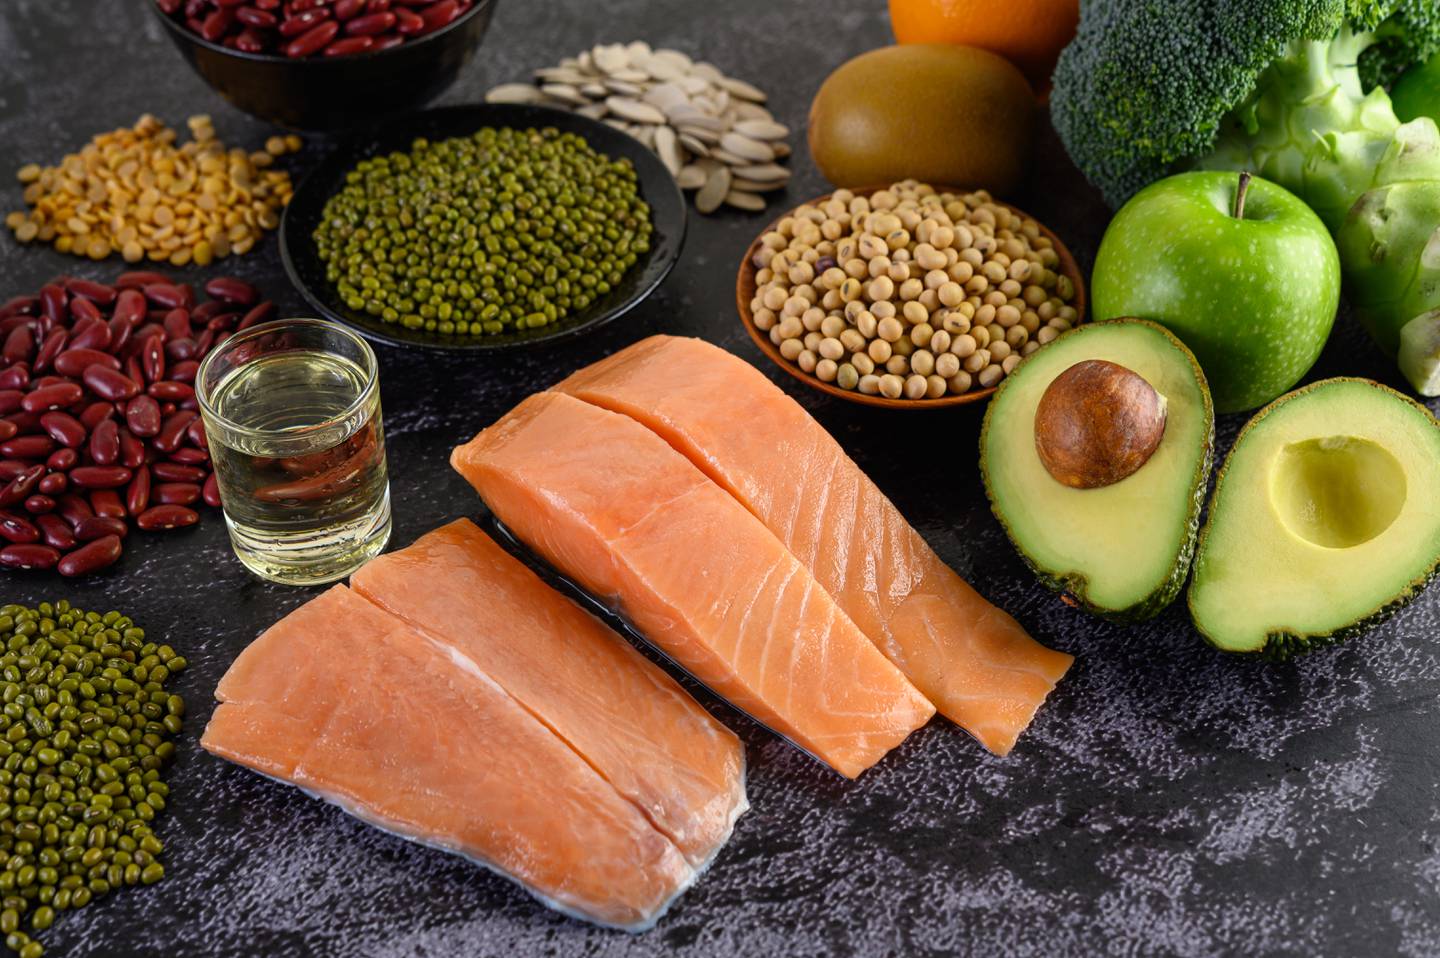 Salmão is one of the main sources of vitamin D